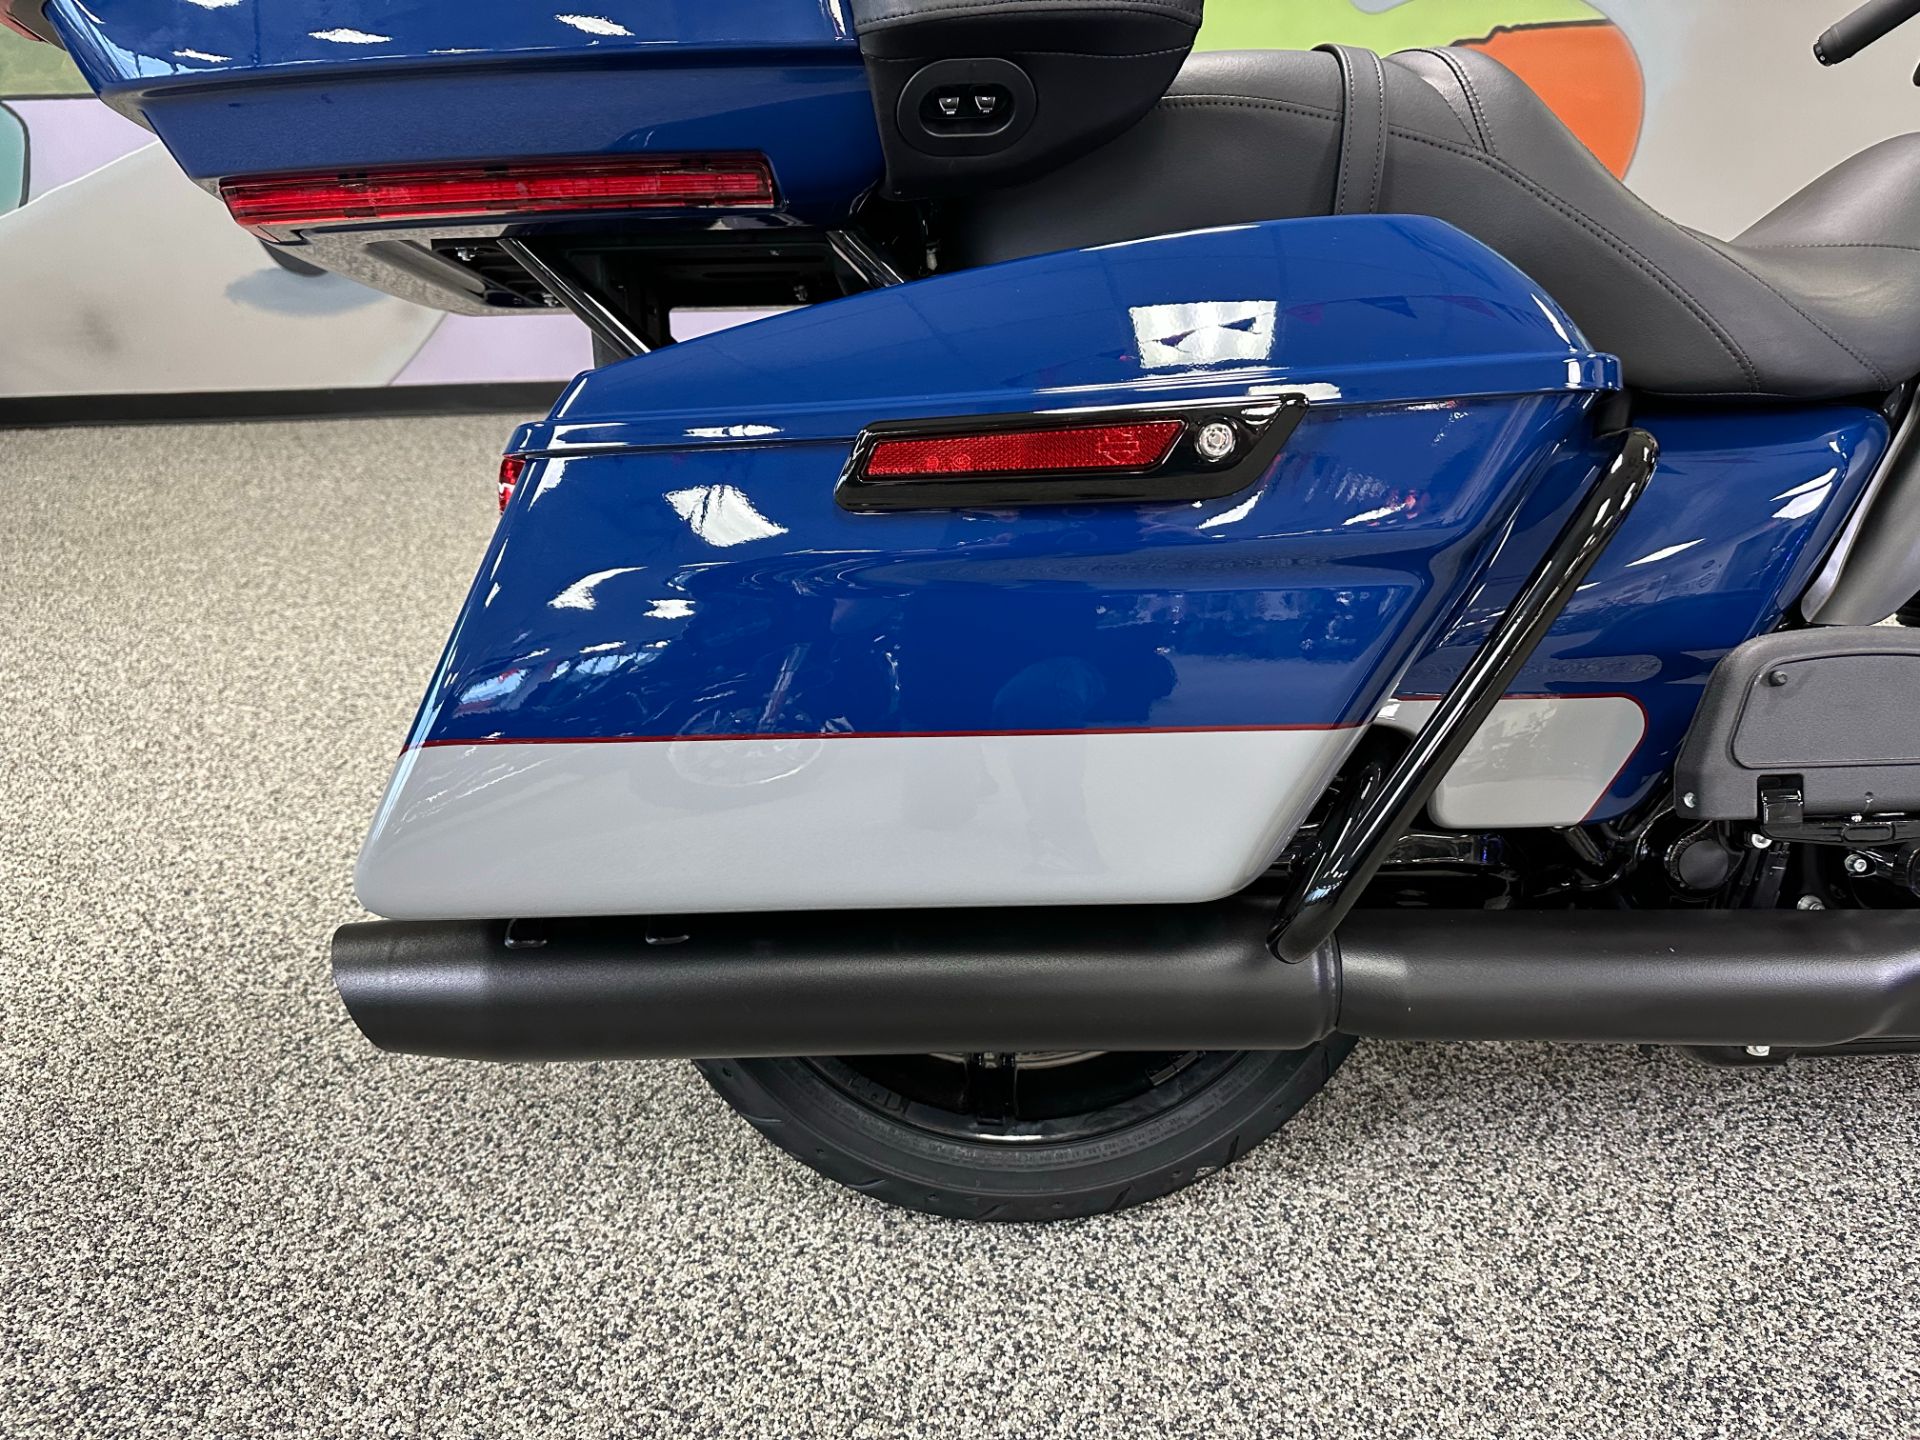 2023 Harley-Davidson Road Glide® Limited in Knoxville, Tennessee - Photo 10